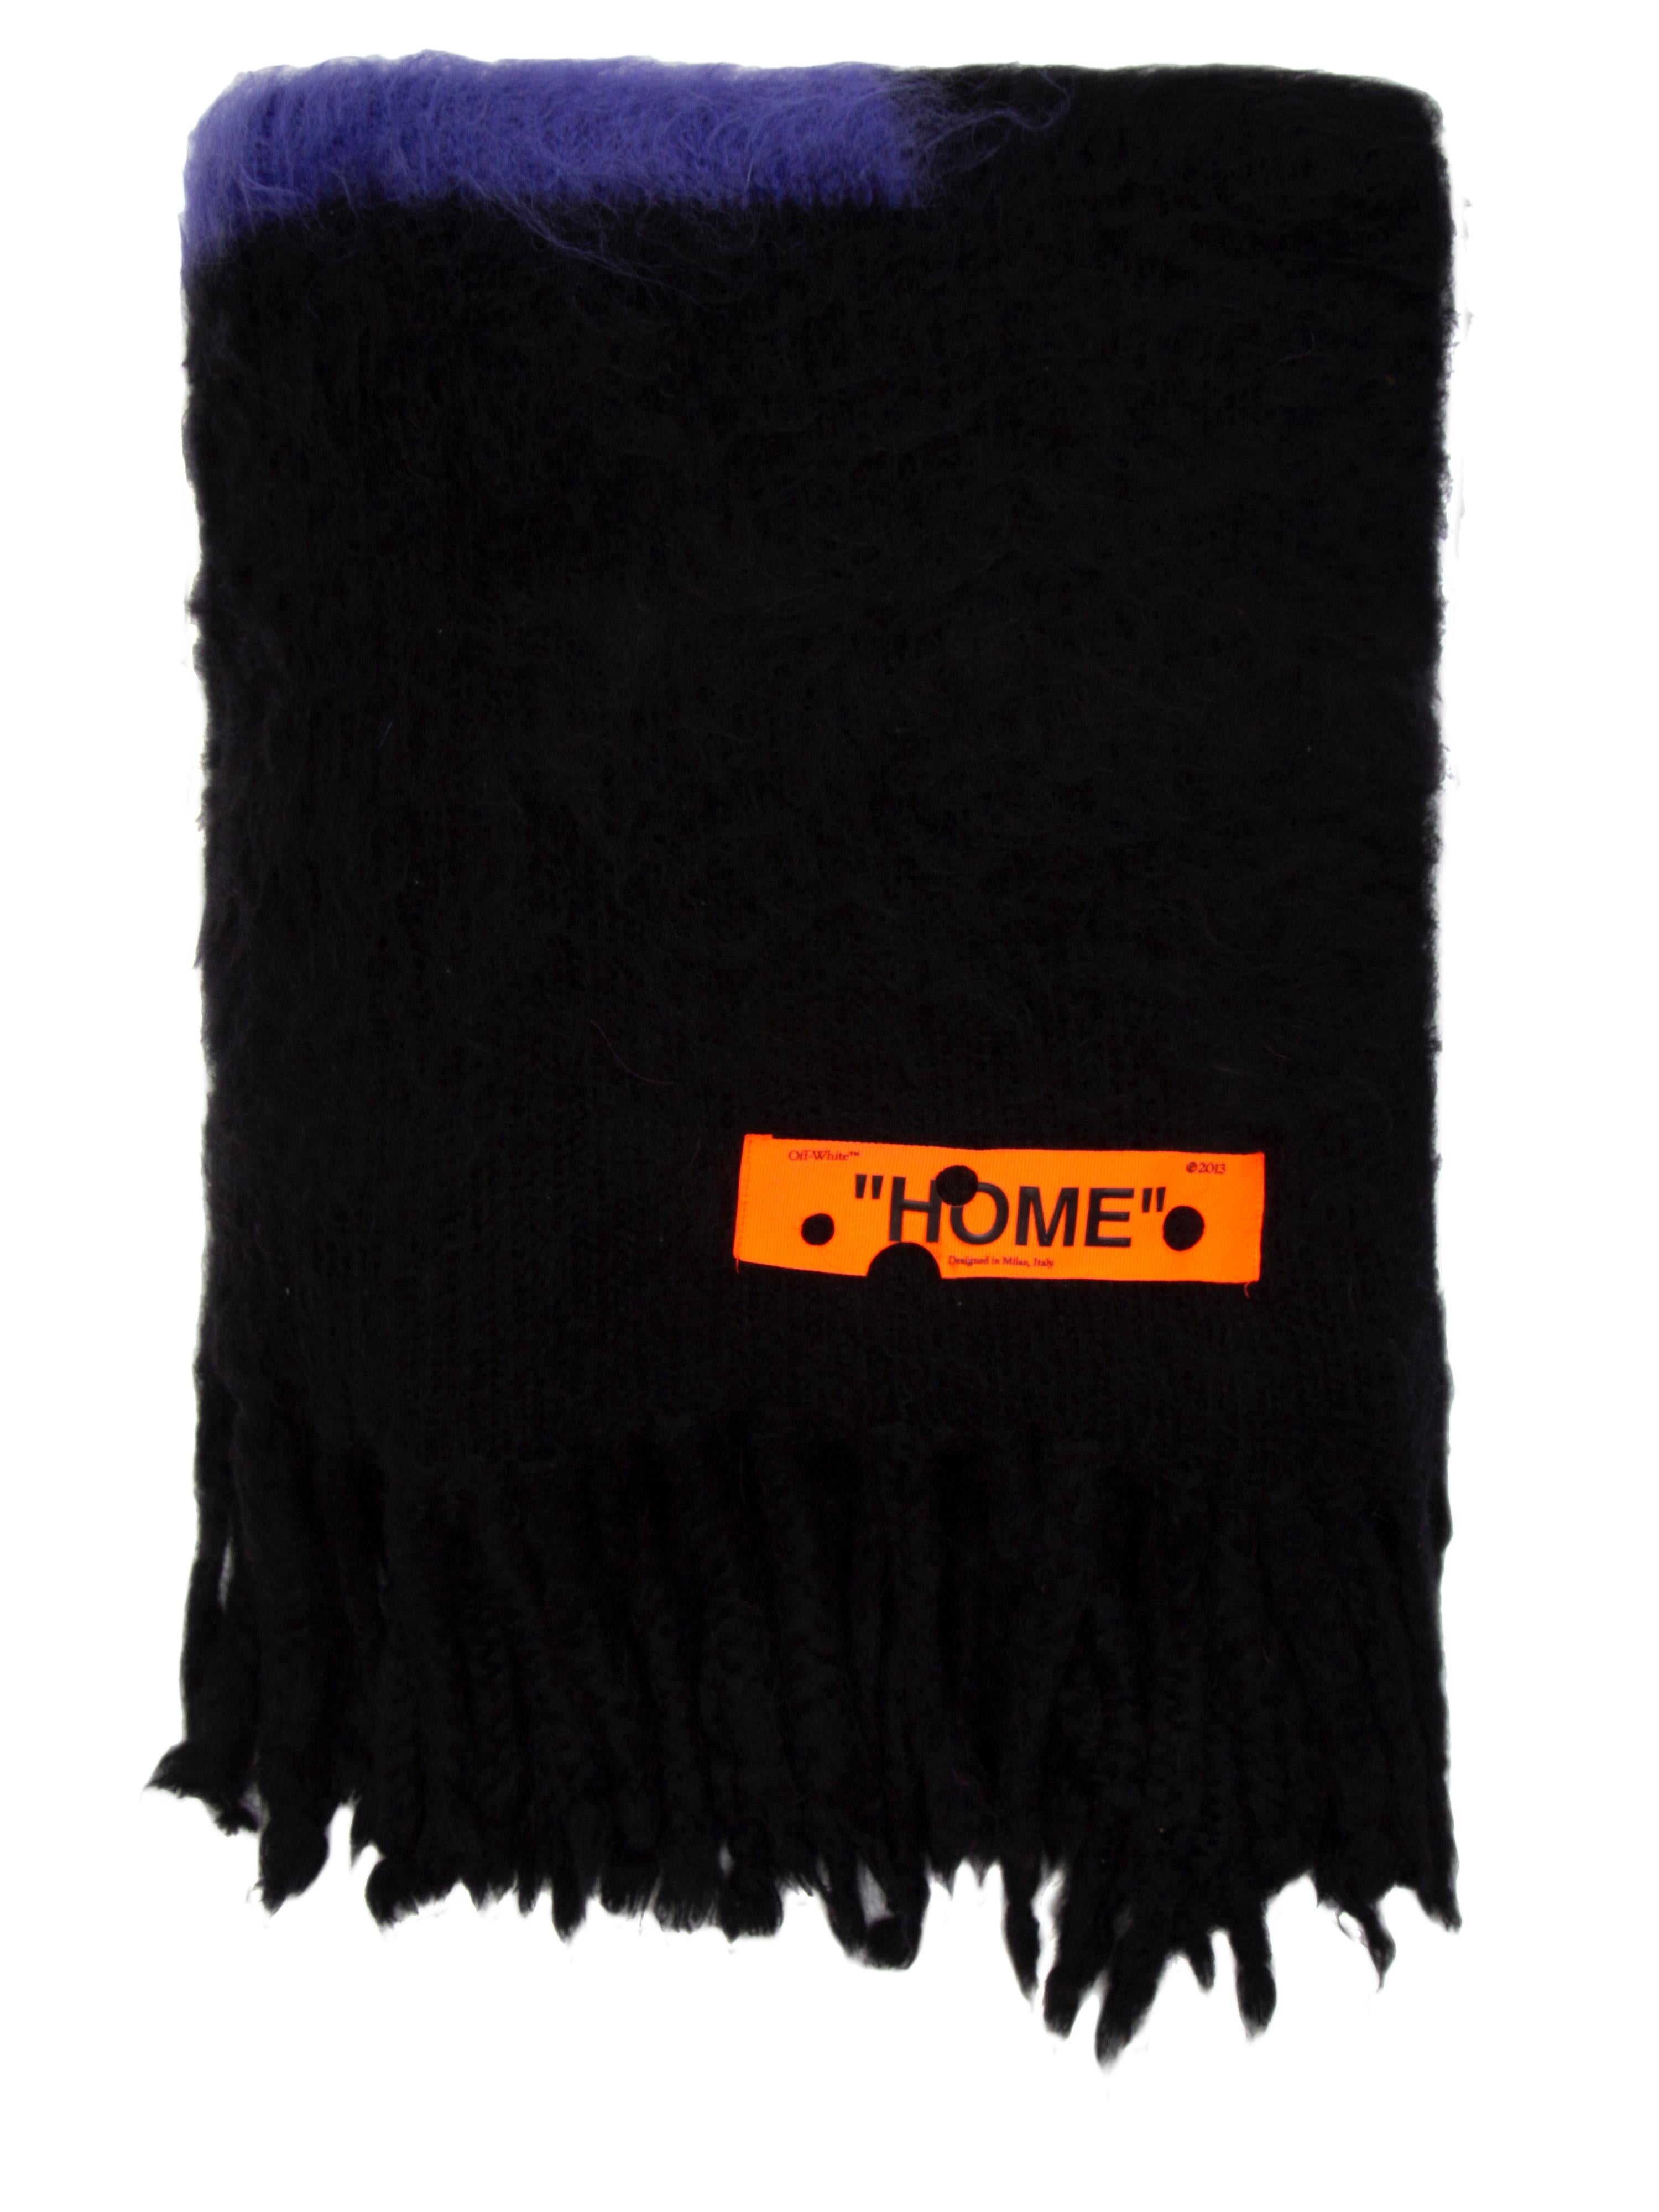 Brushed mohair Blanket with big gradient arrow, pop colors variations, same concept in RTW men and women knitwear collection.
By Virgil Abloh
Dimensions: 130 W x 220 H
This item is only available to be purchased and shipped to the United States.